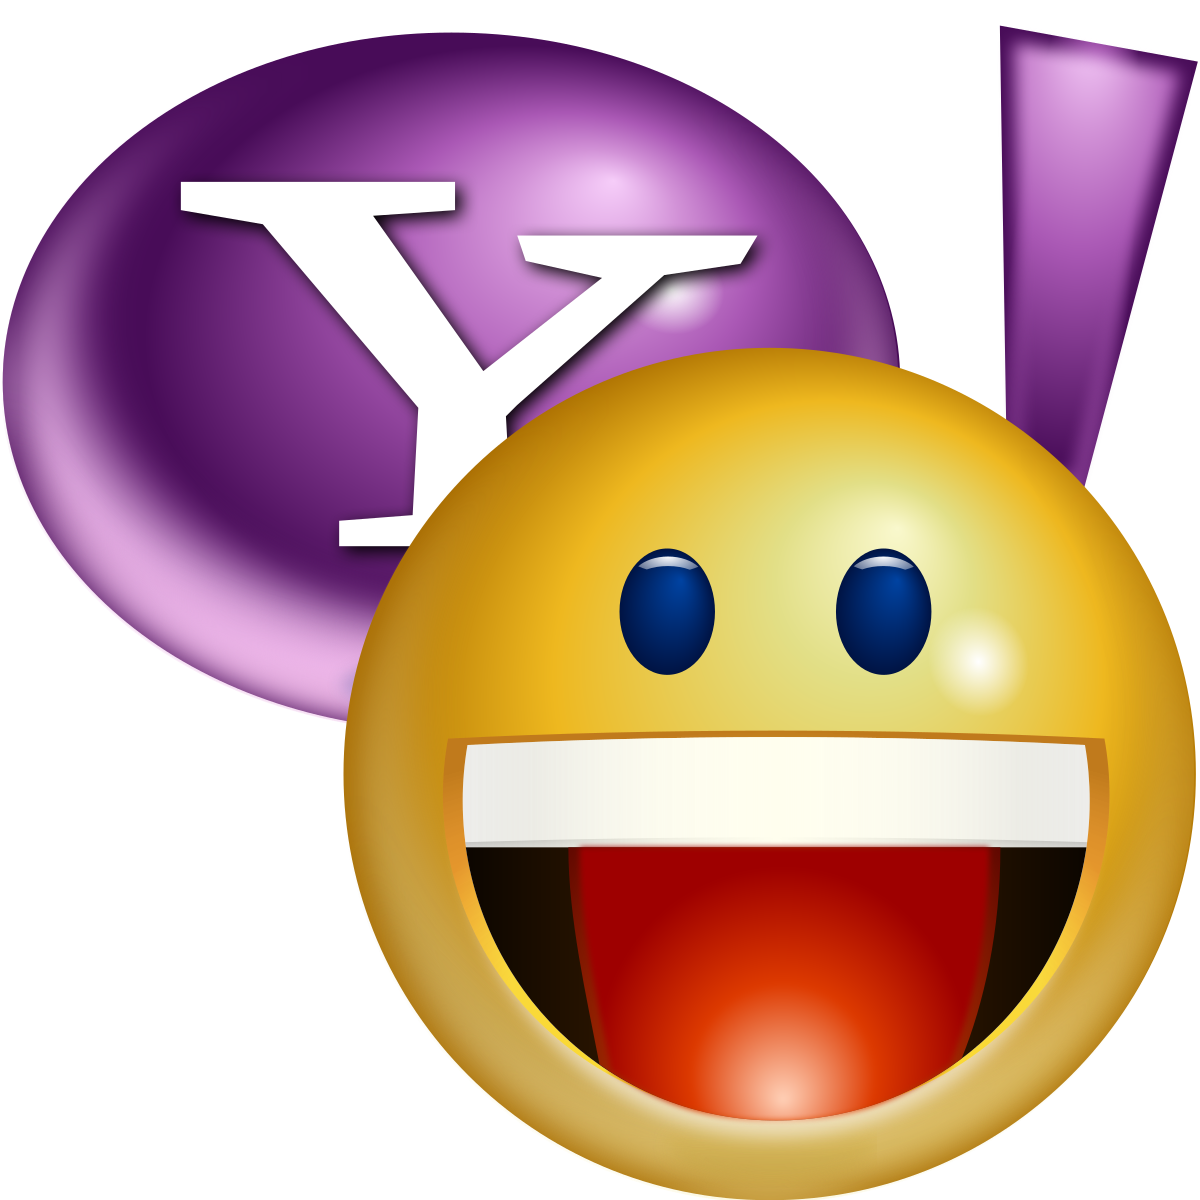 yahoo messenger for mac os x lion free download